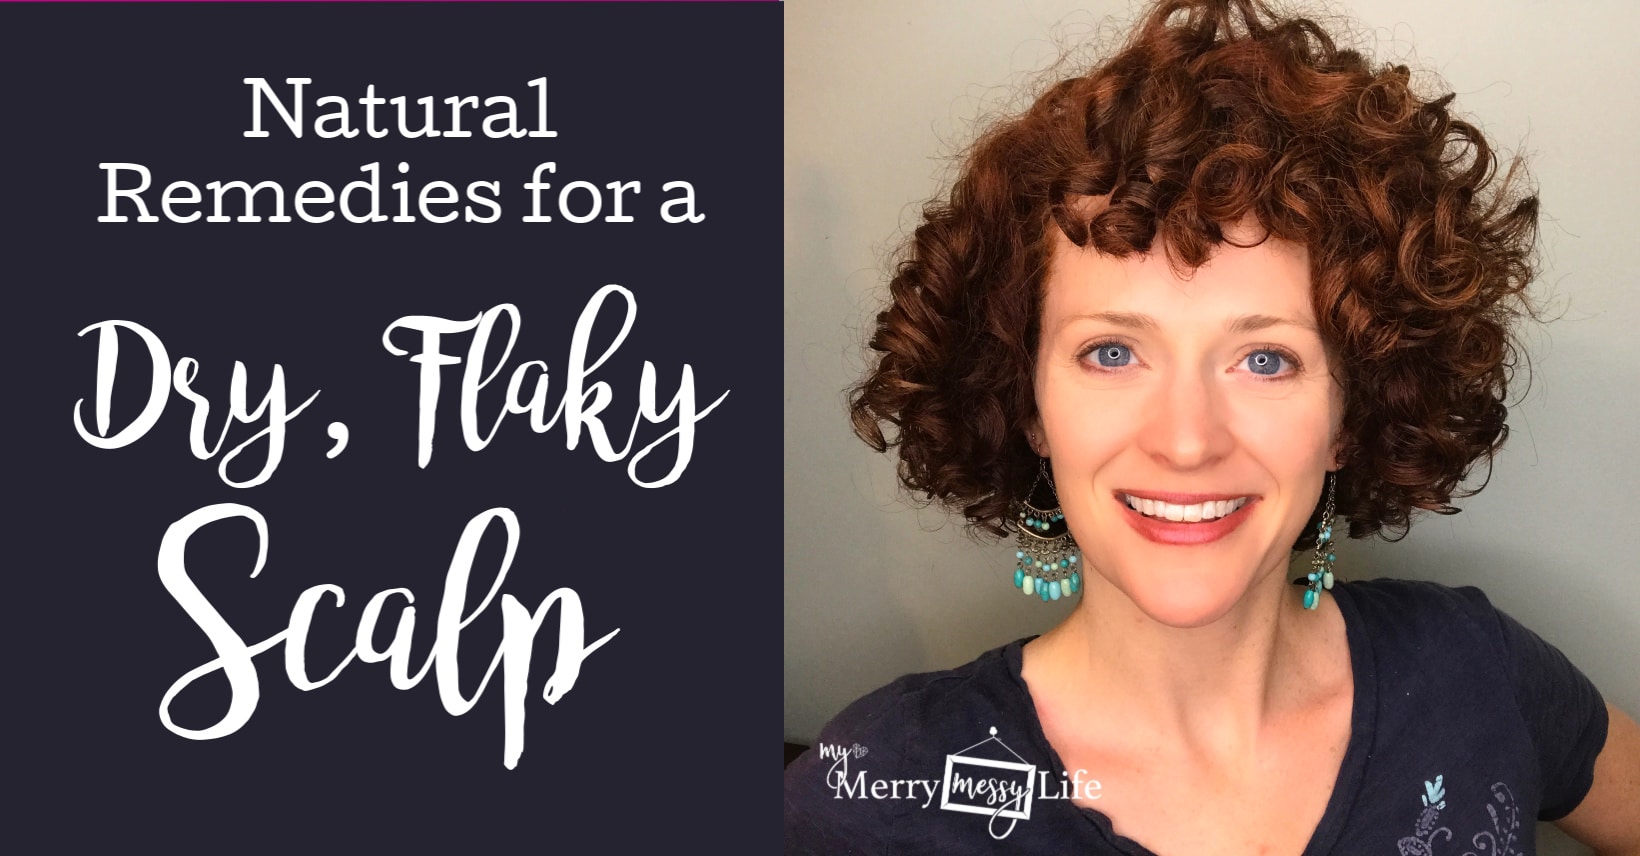 Natural Remedies for a Dry, Itchy, Flaky Scalp using essential oils, natural shampoos, a sugar scrub, clean diet and supplements